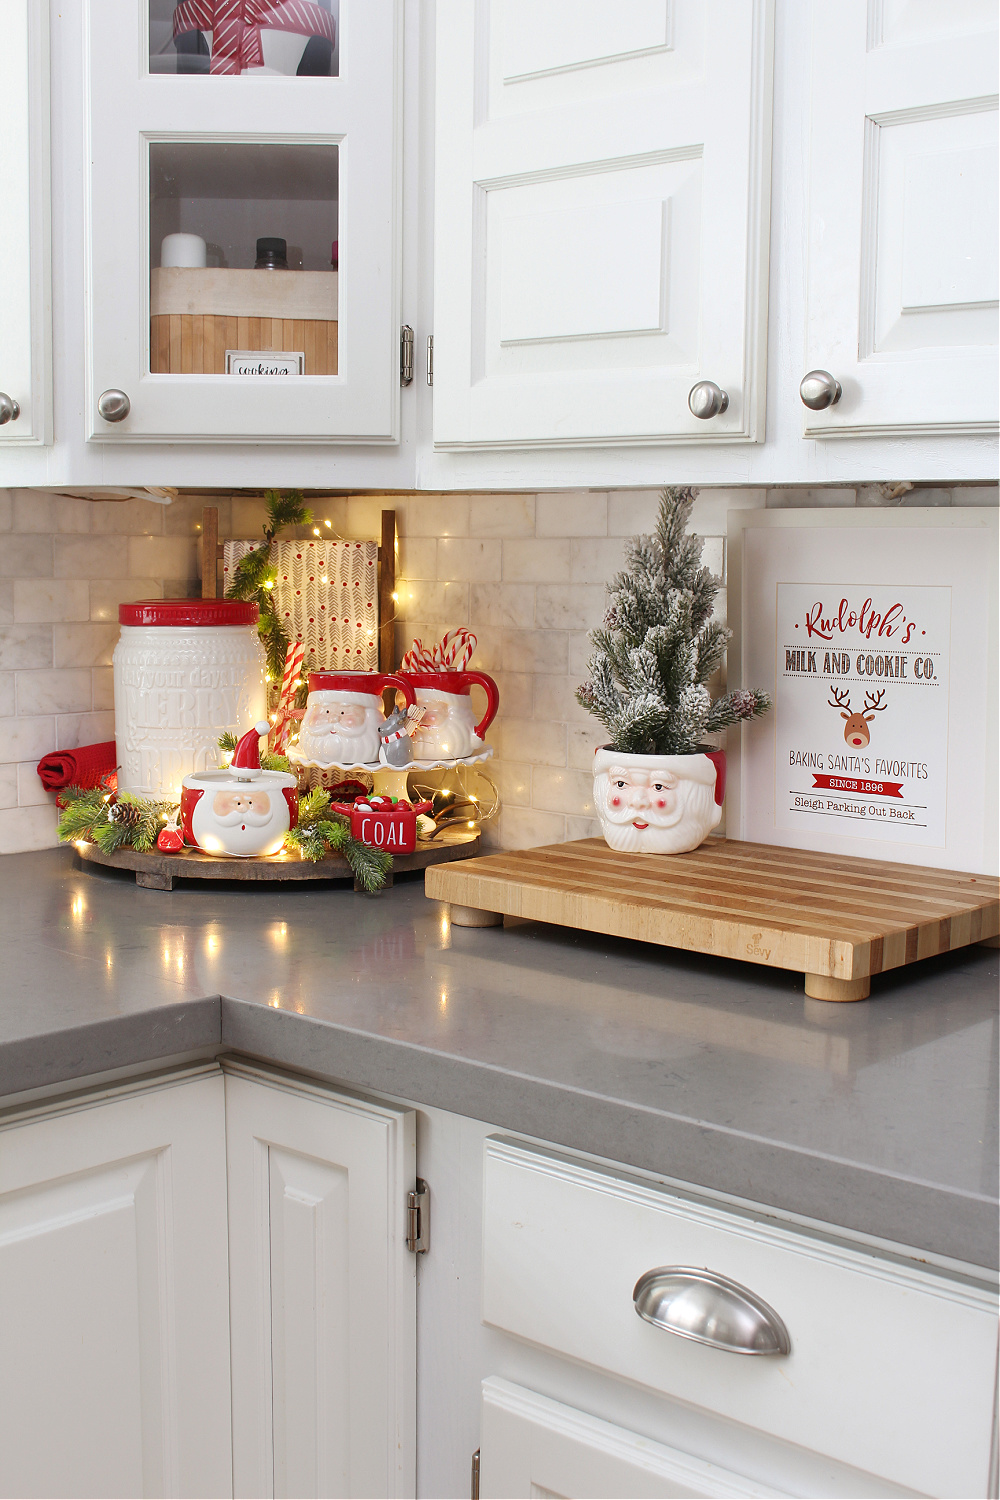 Festive Red and White Christmas Kitchen Decor Ideas   Clean and ...